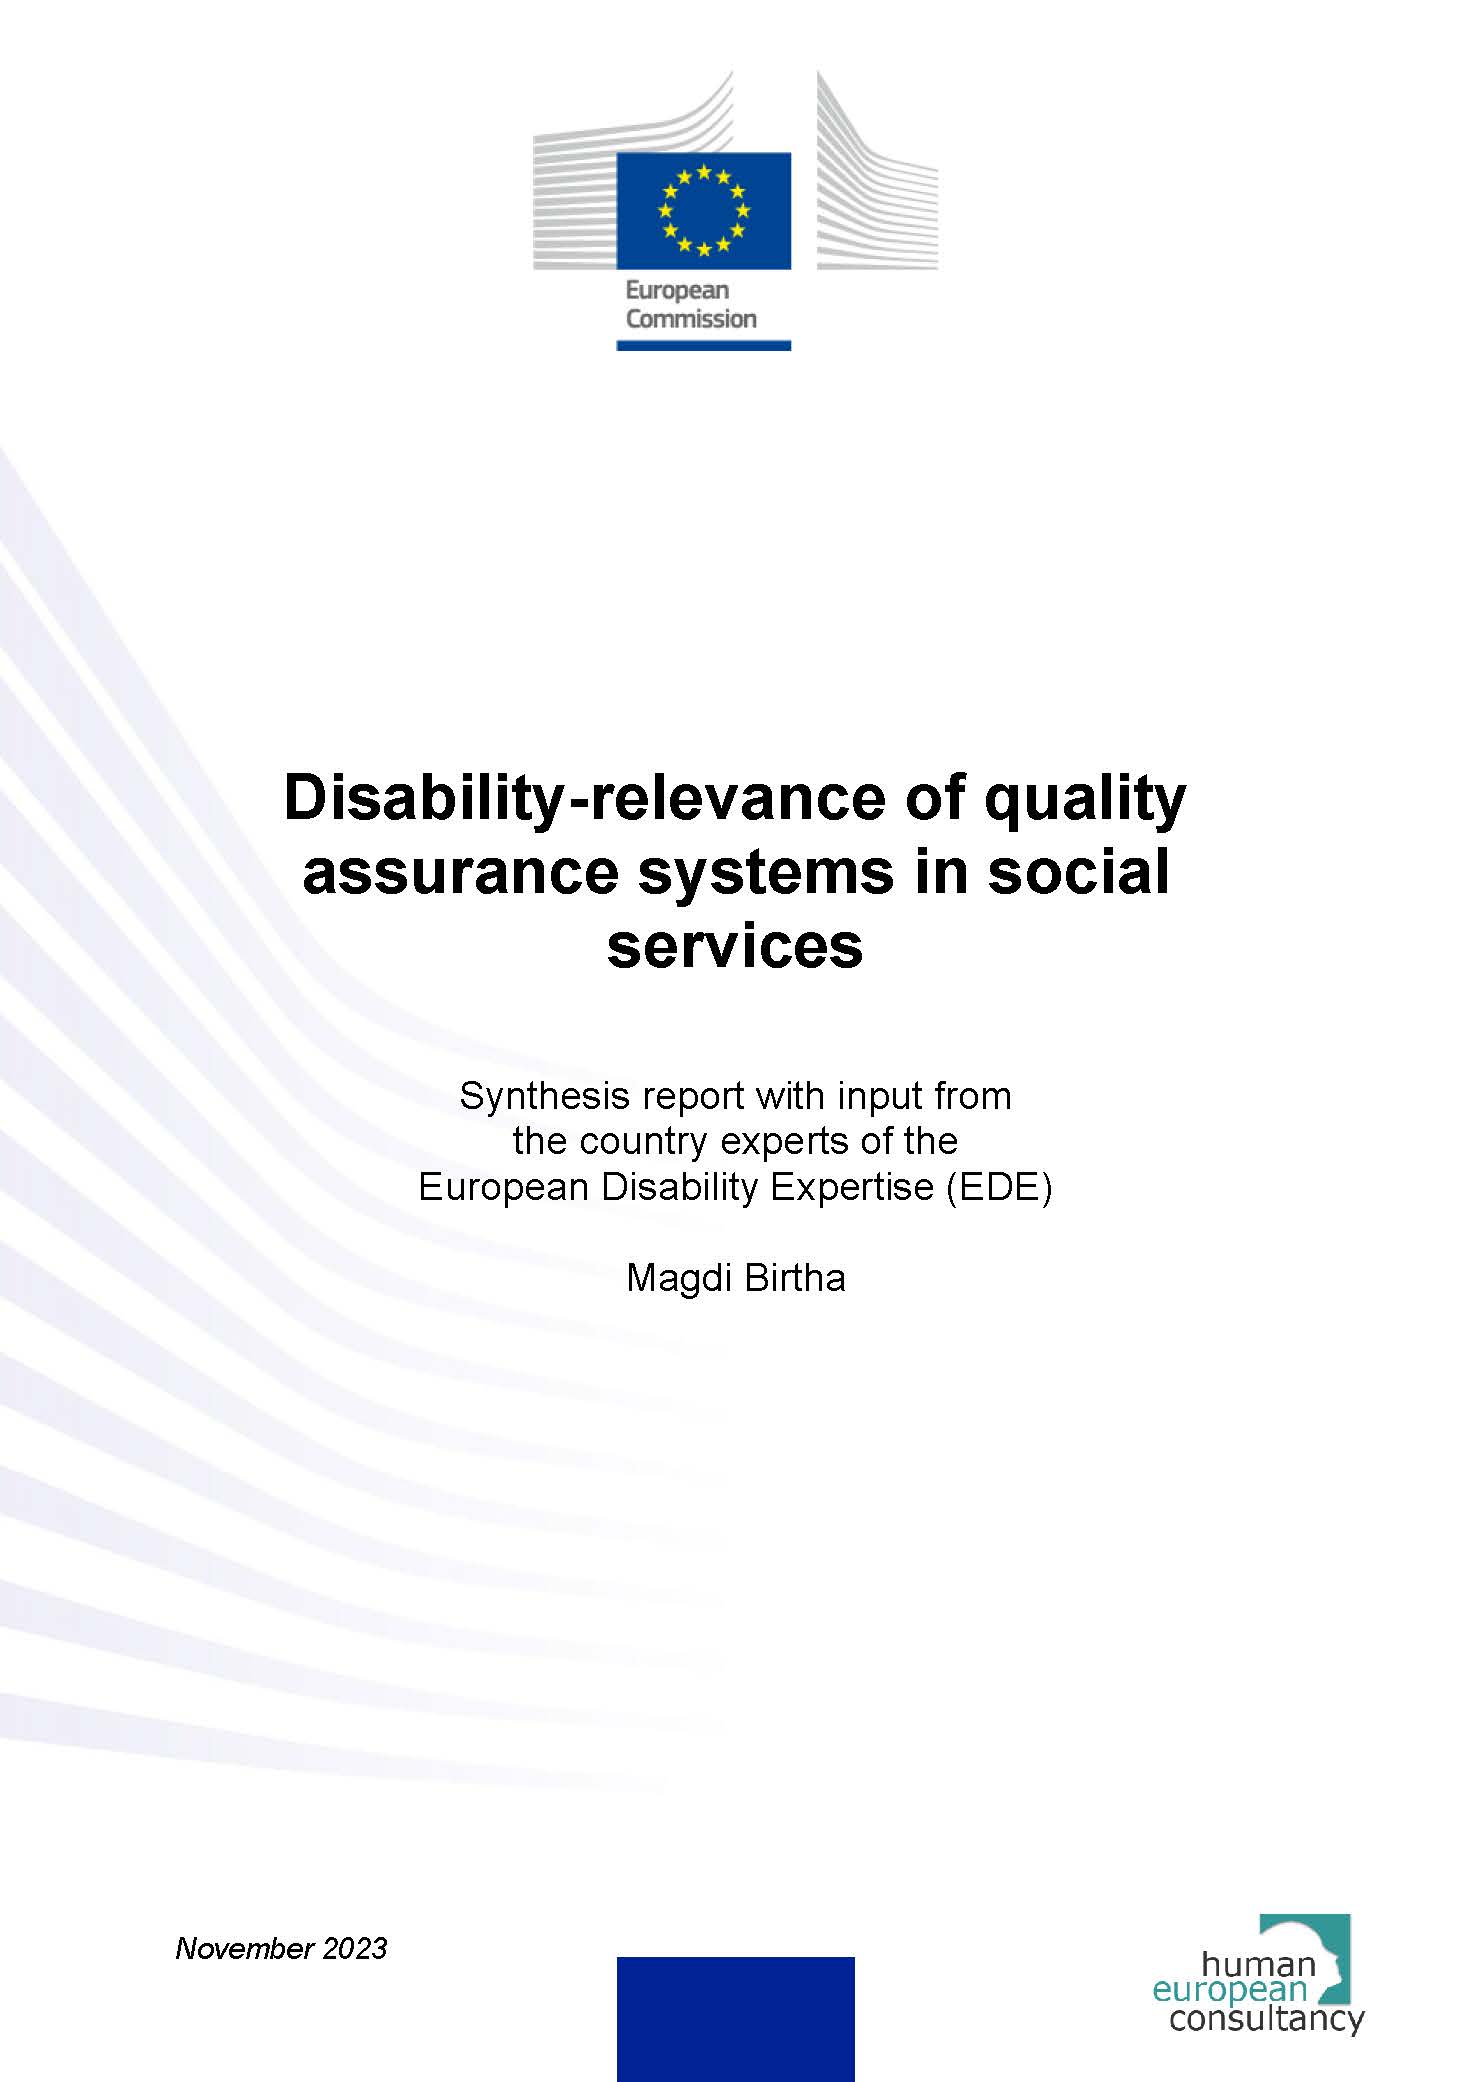 Disability-relevance of quality assurance systems in social services